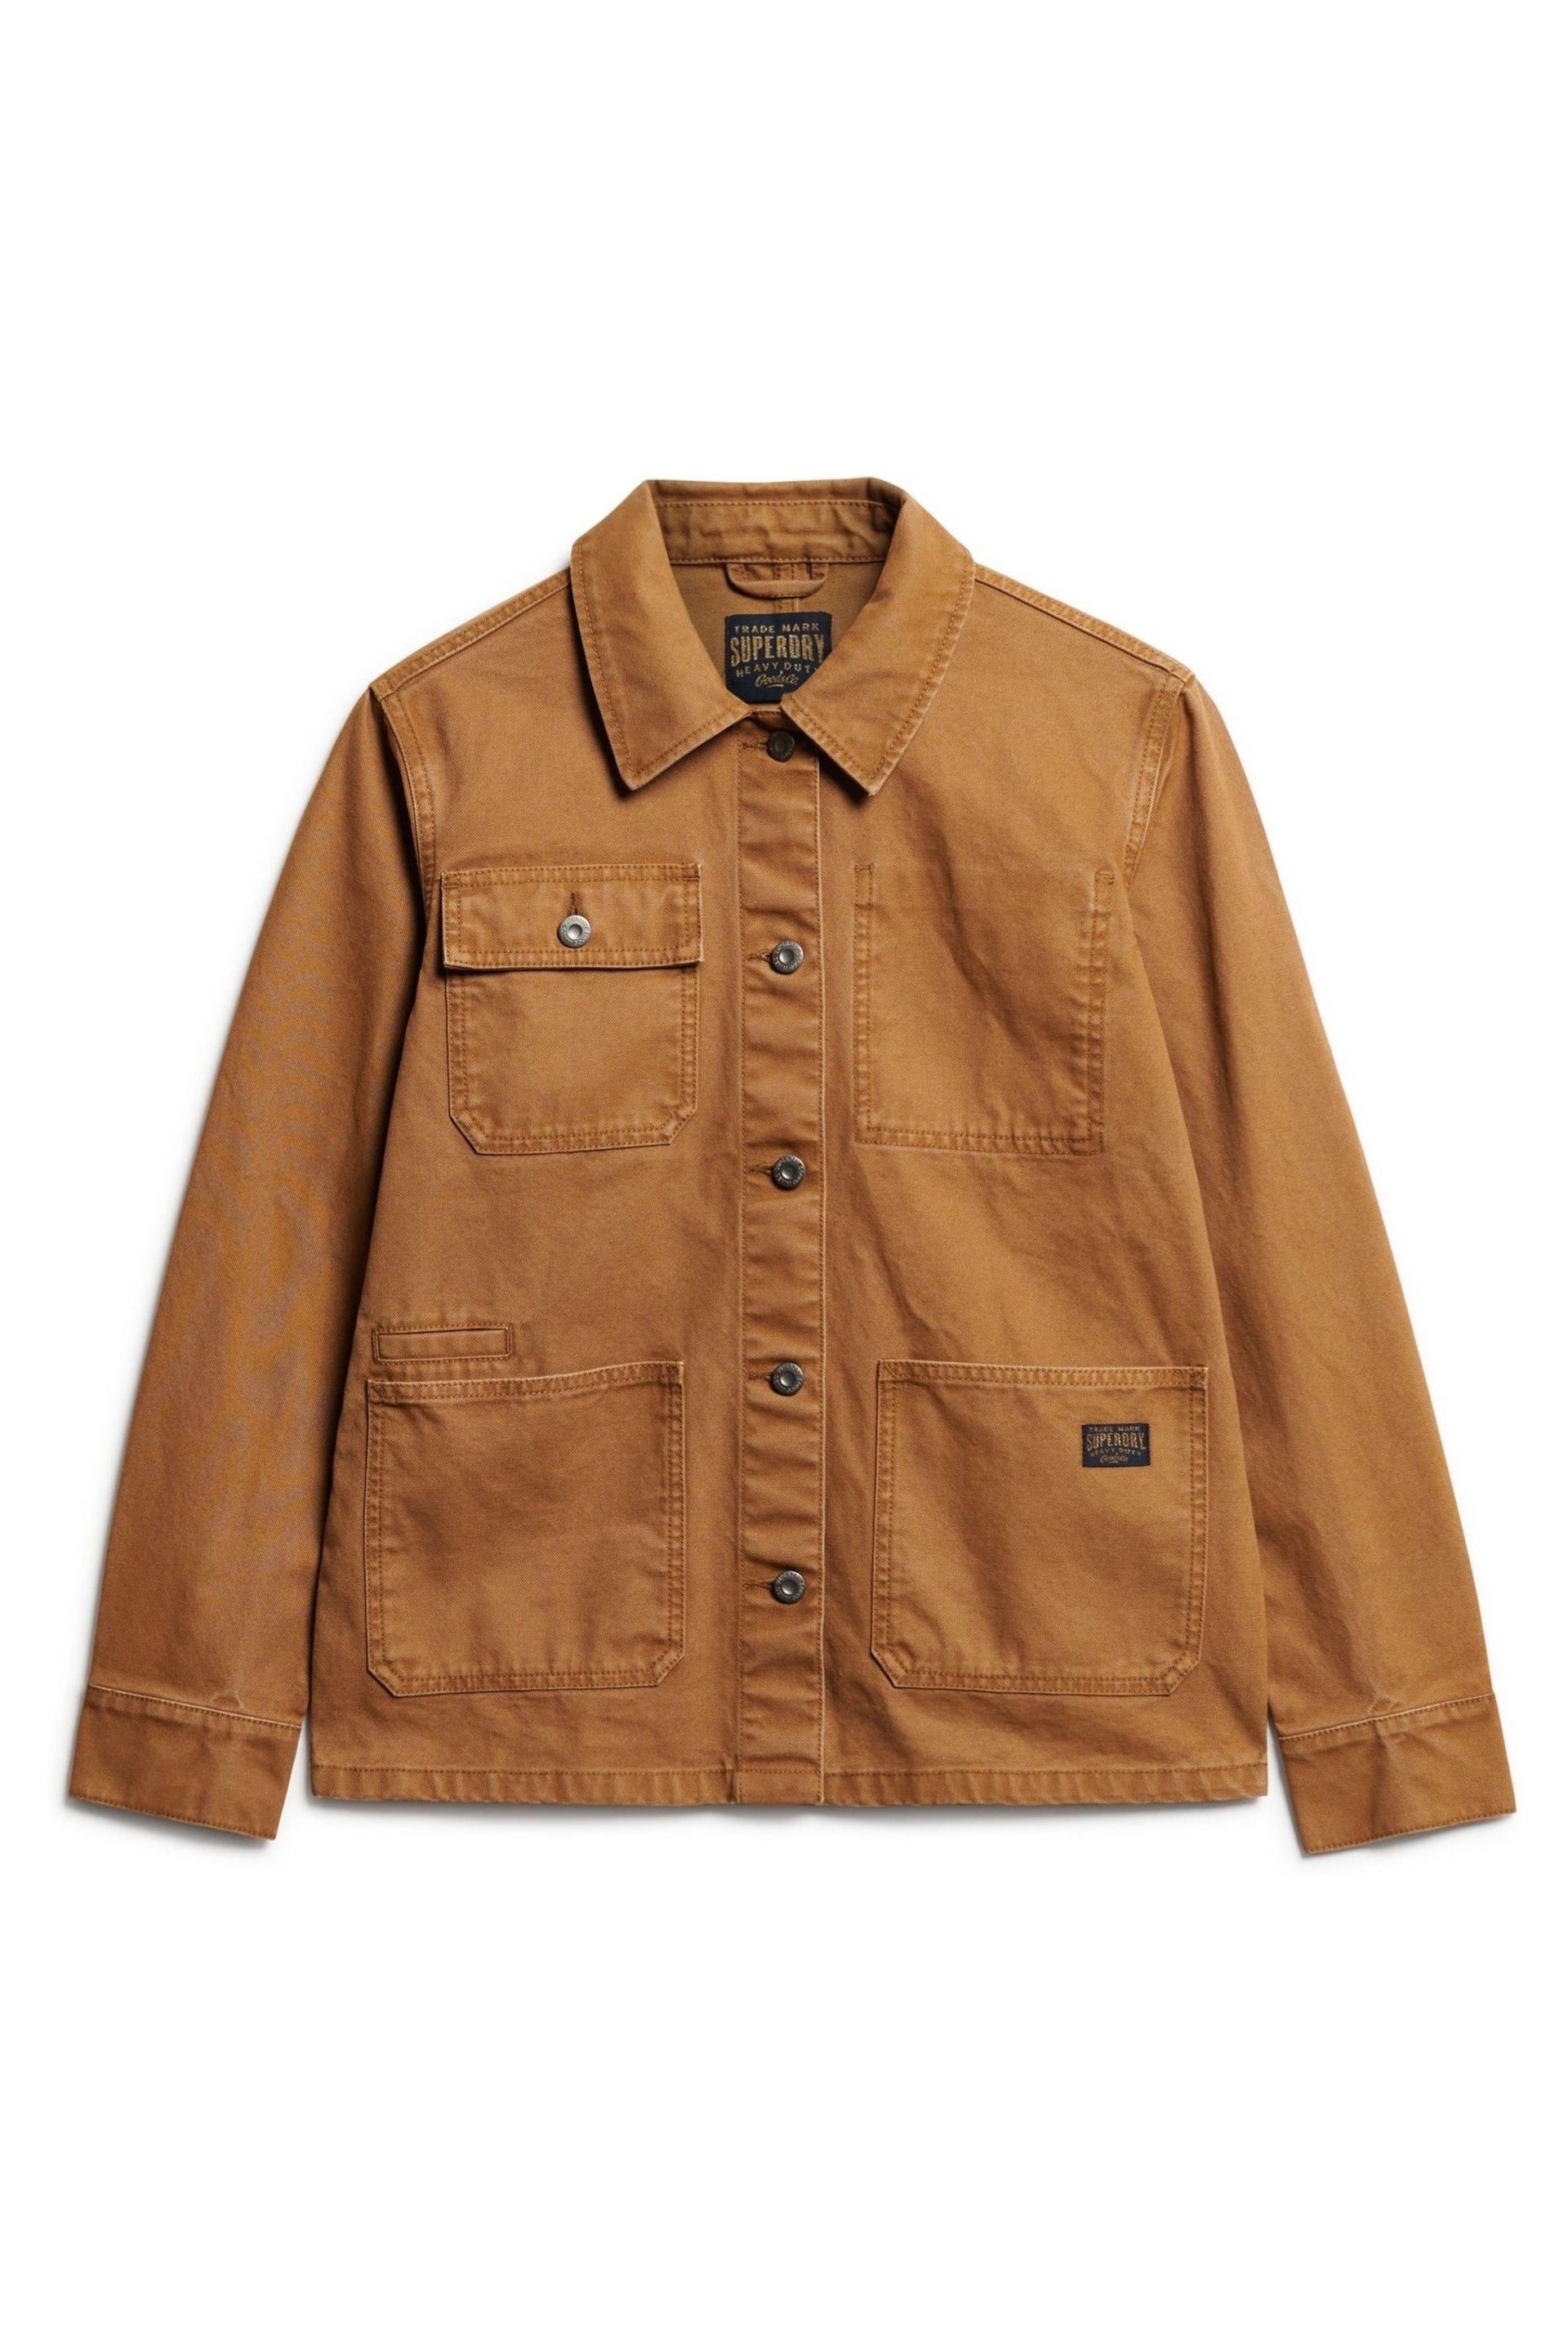 SUPERDRY Brown SUPERDRY Canvas Chore Jacket - Image 4 of 6